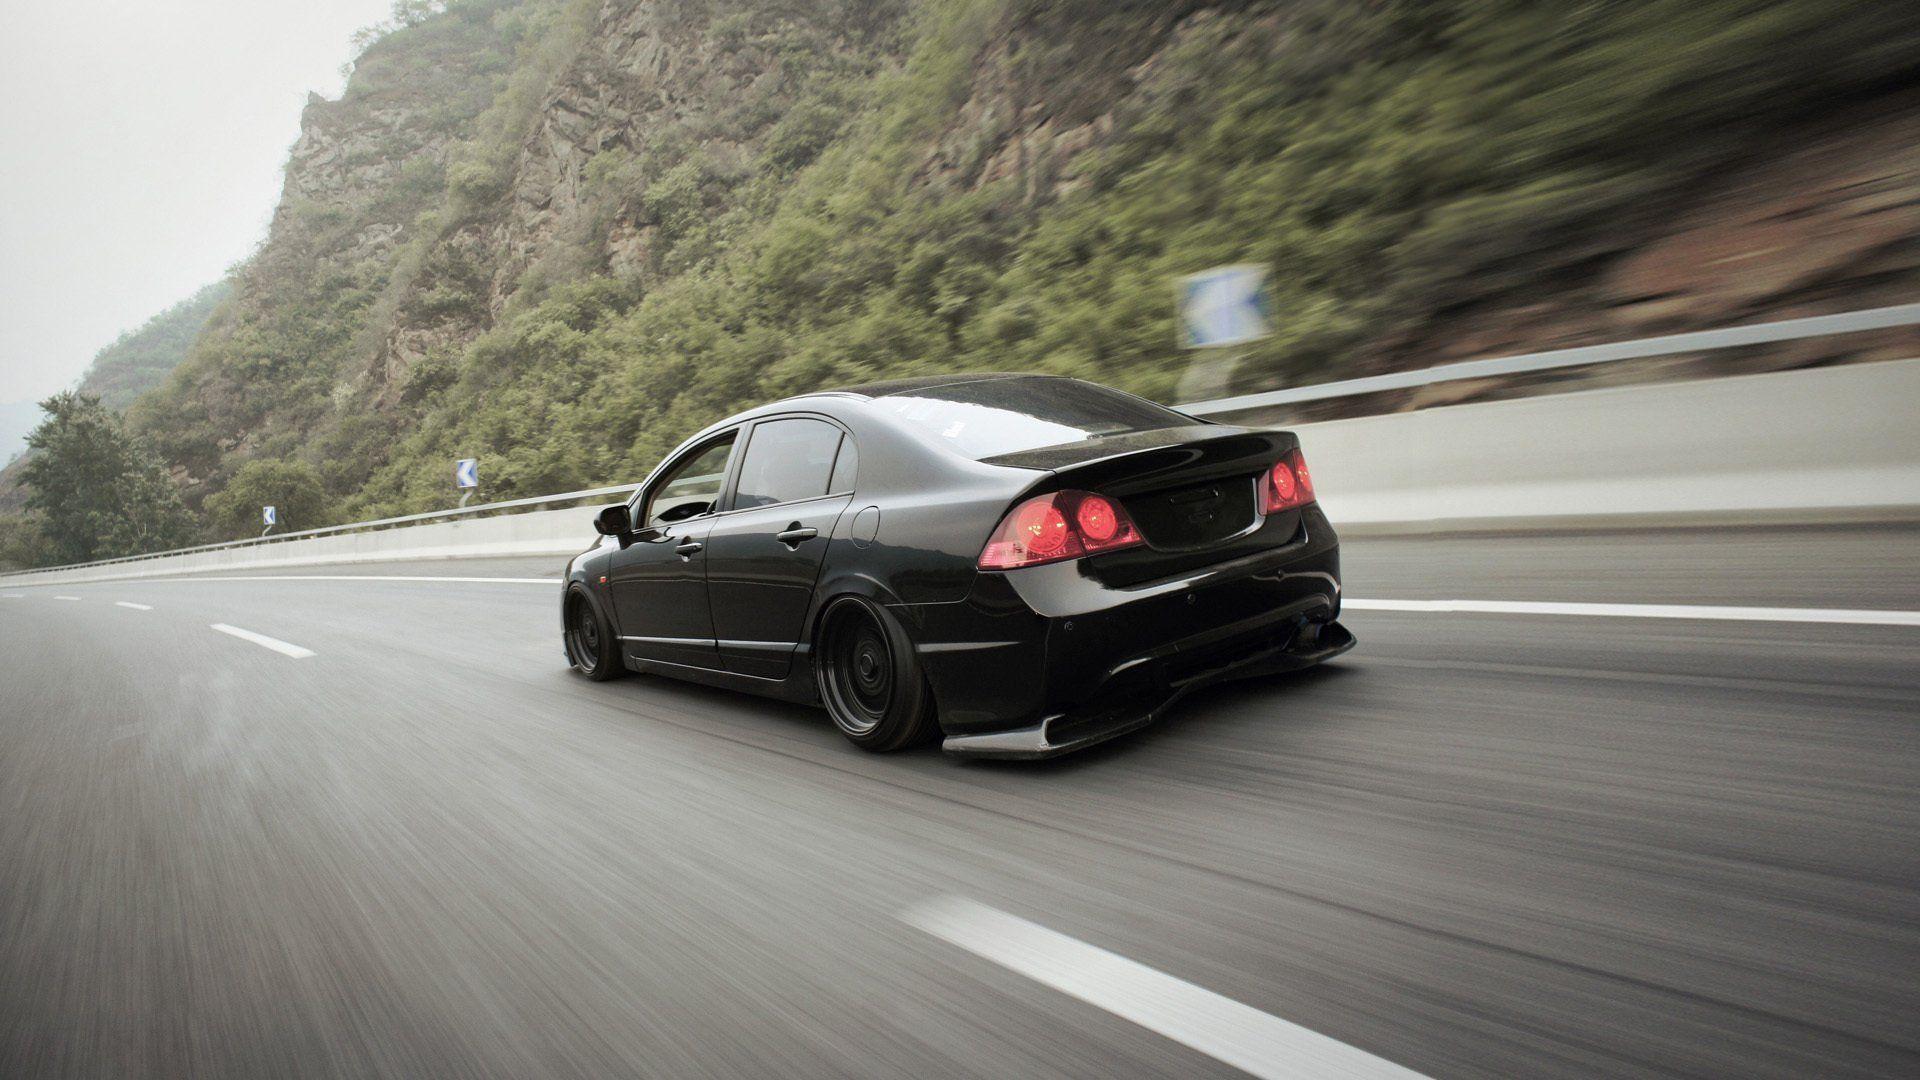 Honda civic low stance nation 2K wallpapers